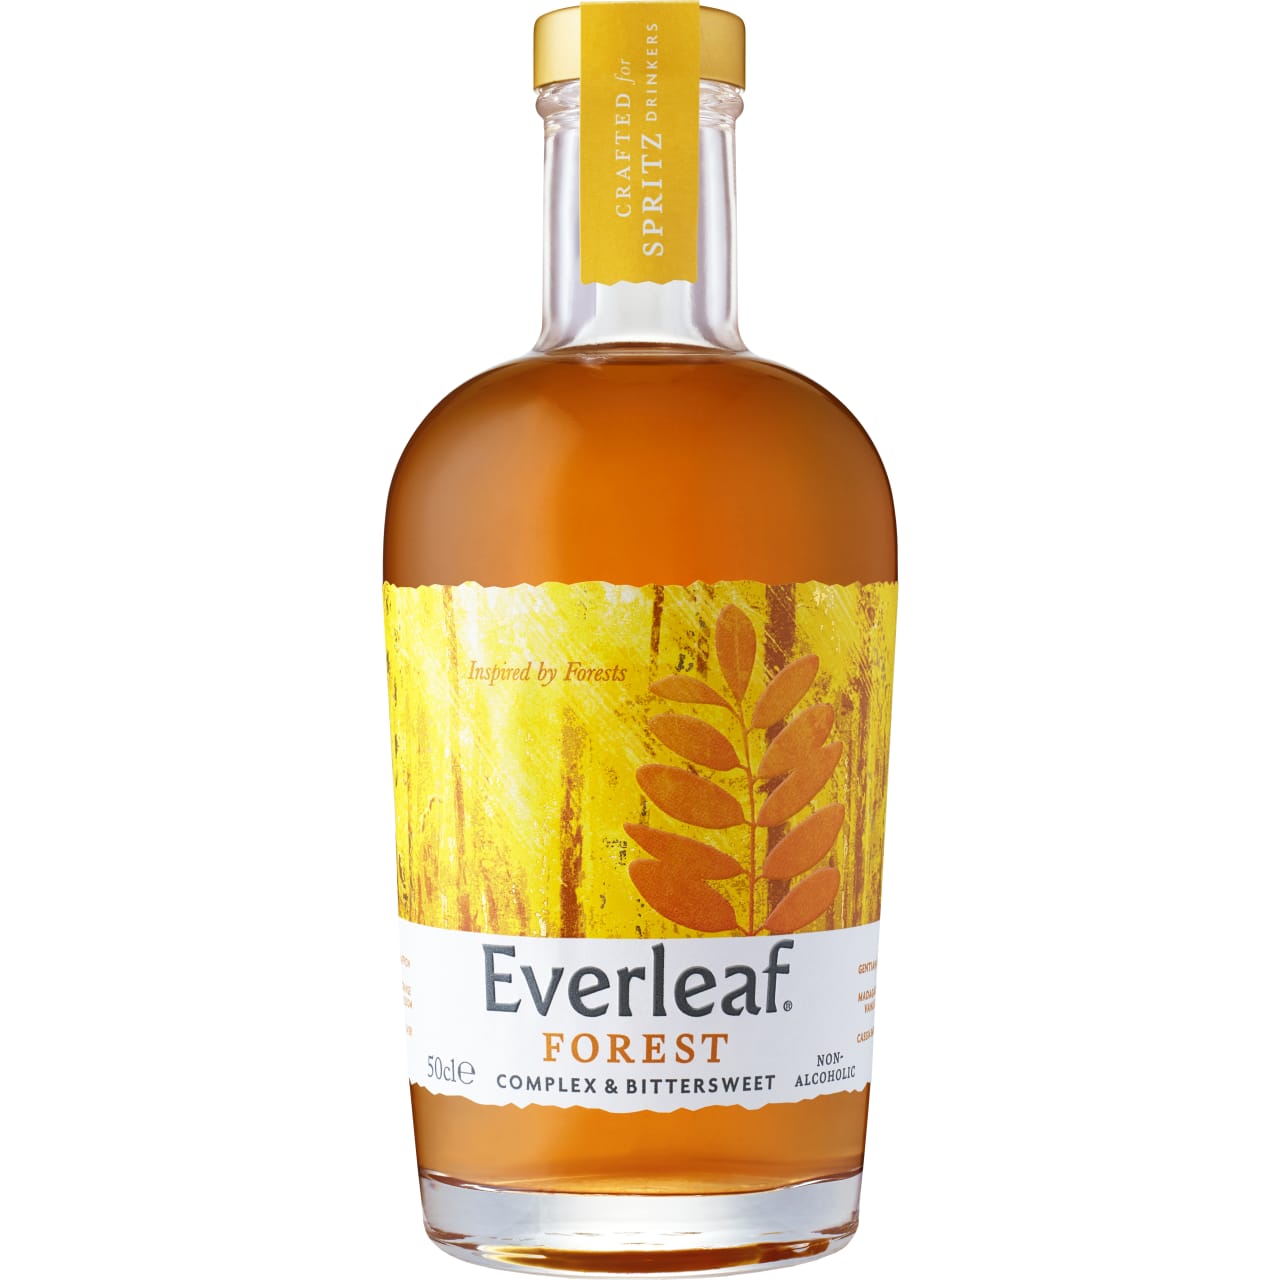 A non-alcoholic aperitif from Everleaf, Forest is flavoured with botanicals including vanilla, gentian and liqourice. It has a bittersweet character; the palate is led by bitter gentian with a sweeter, fruitier undertone.